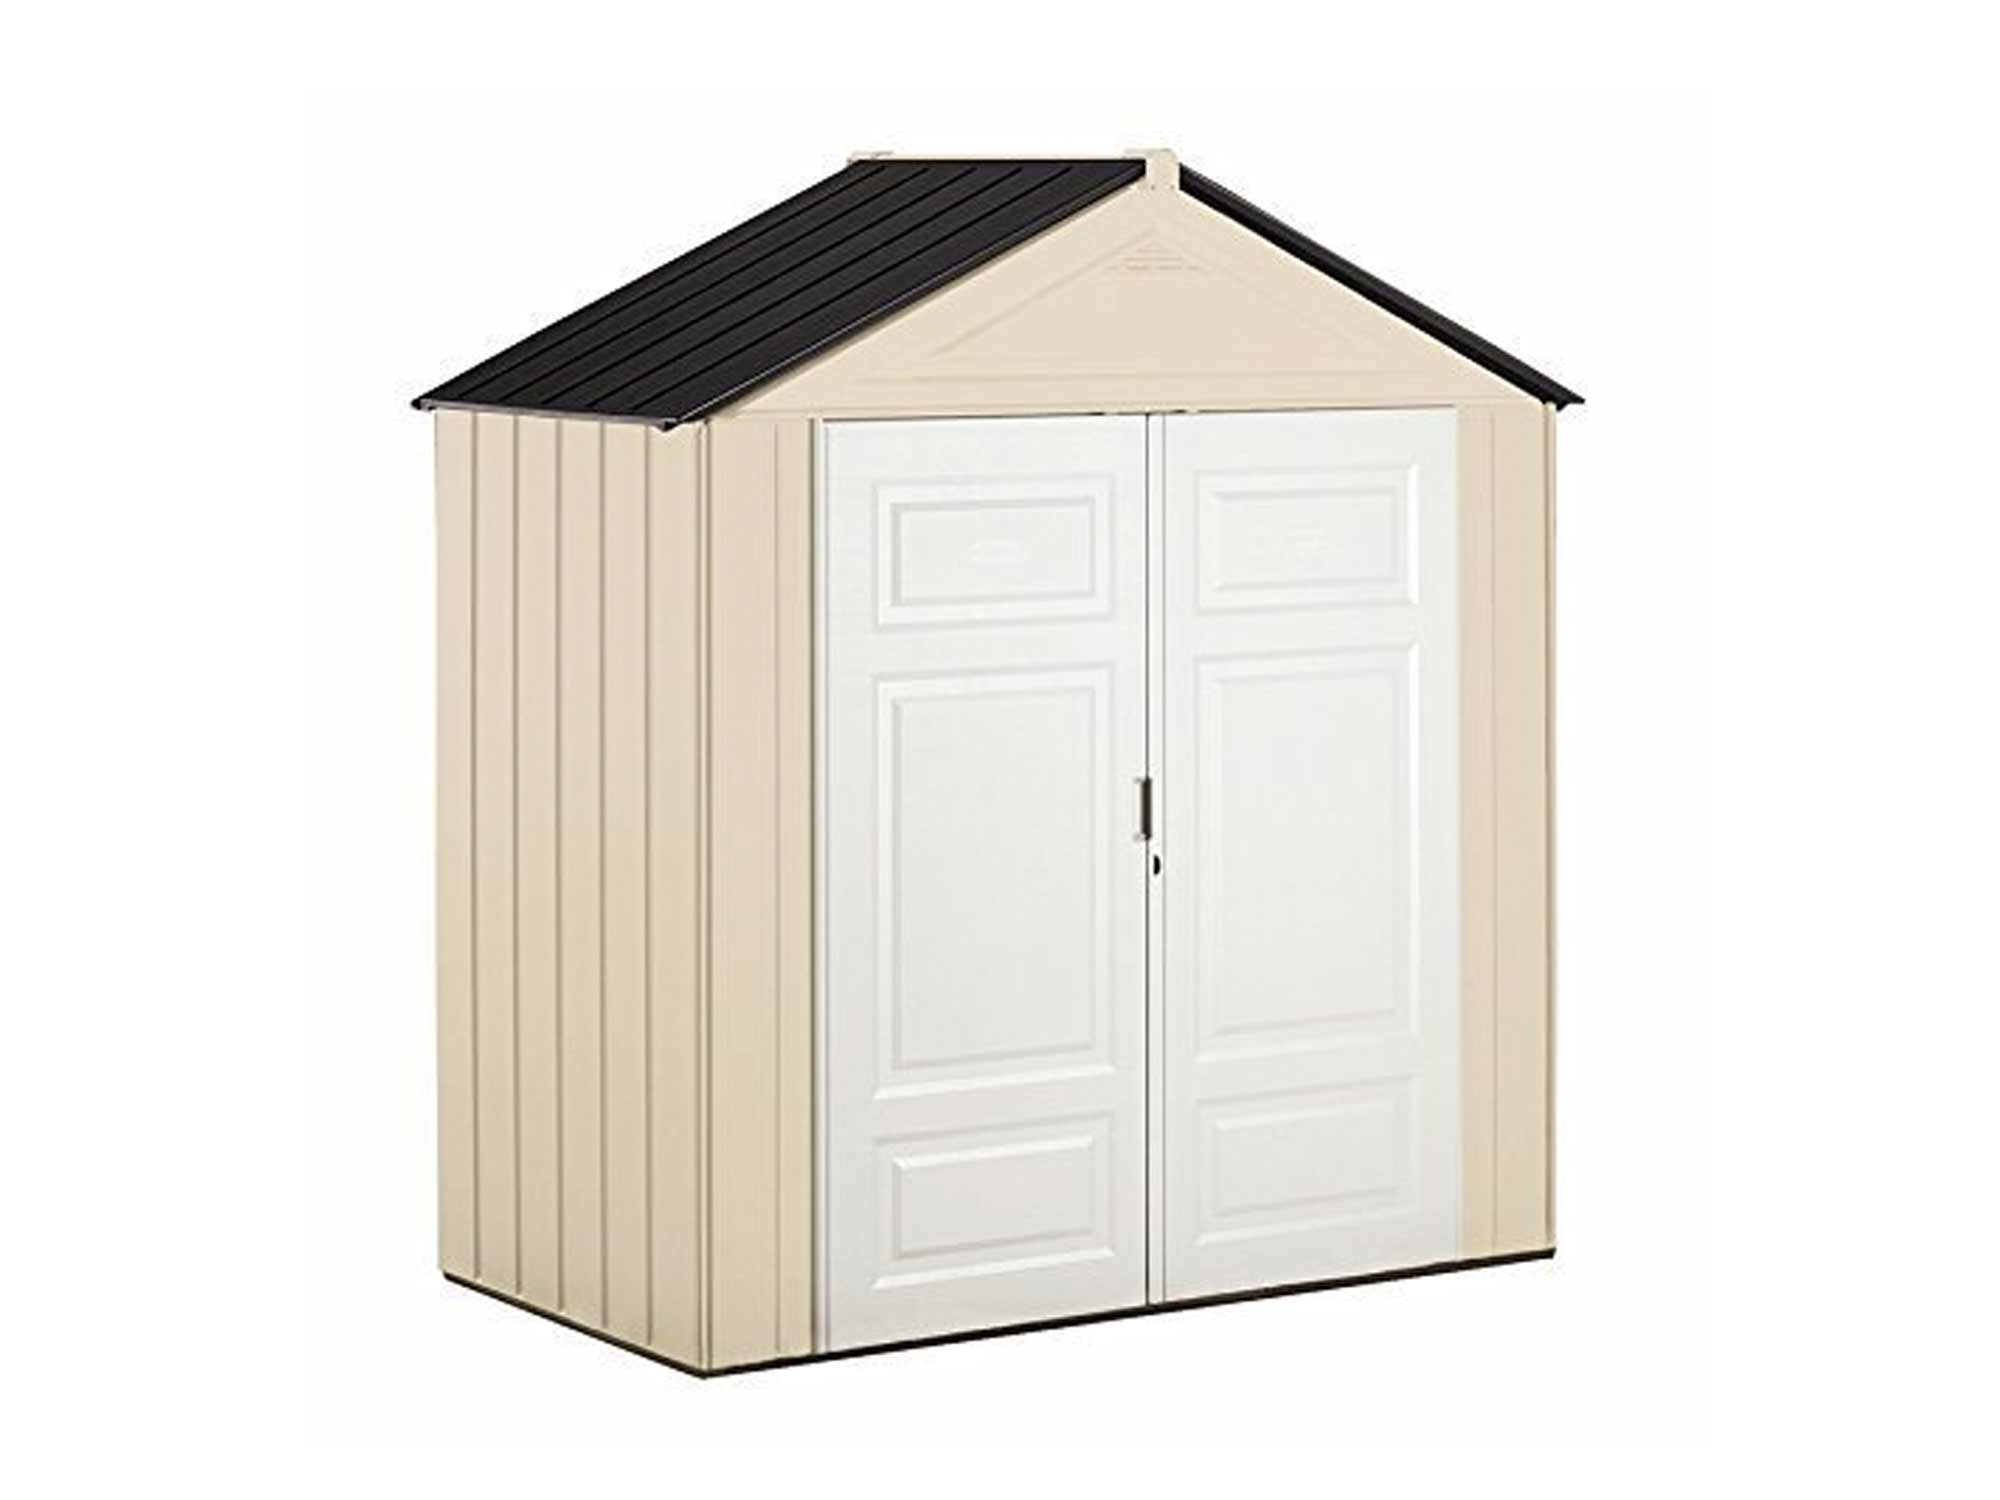 Rubbermaid outdoor shed